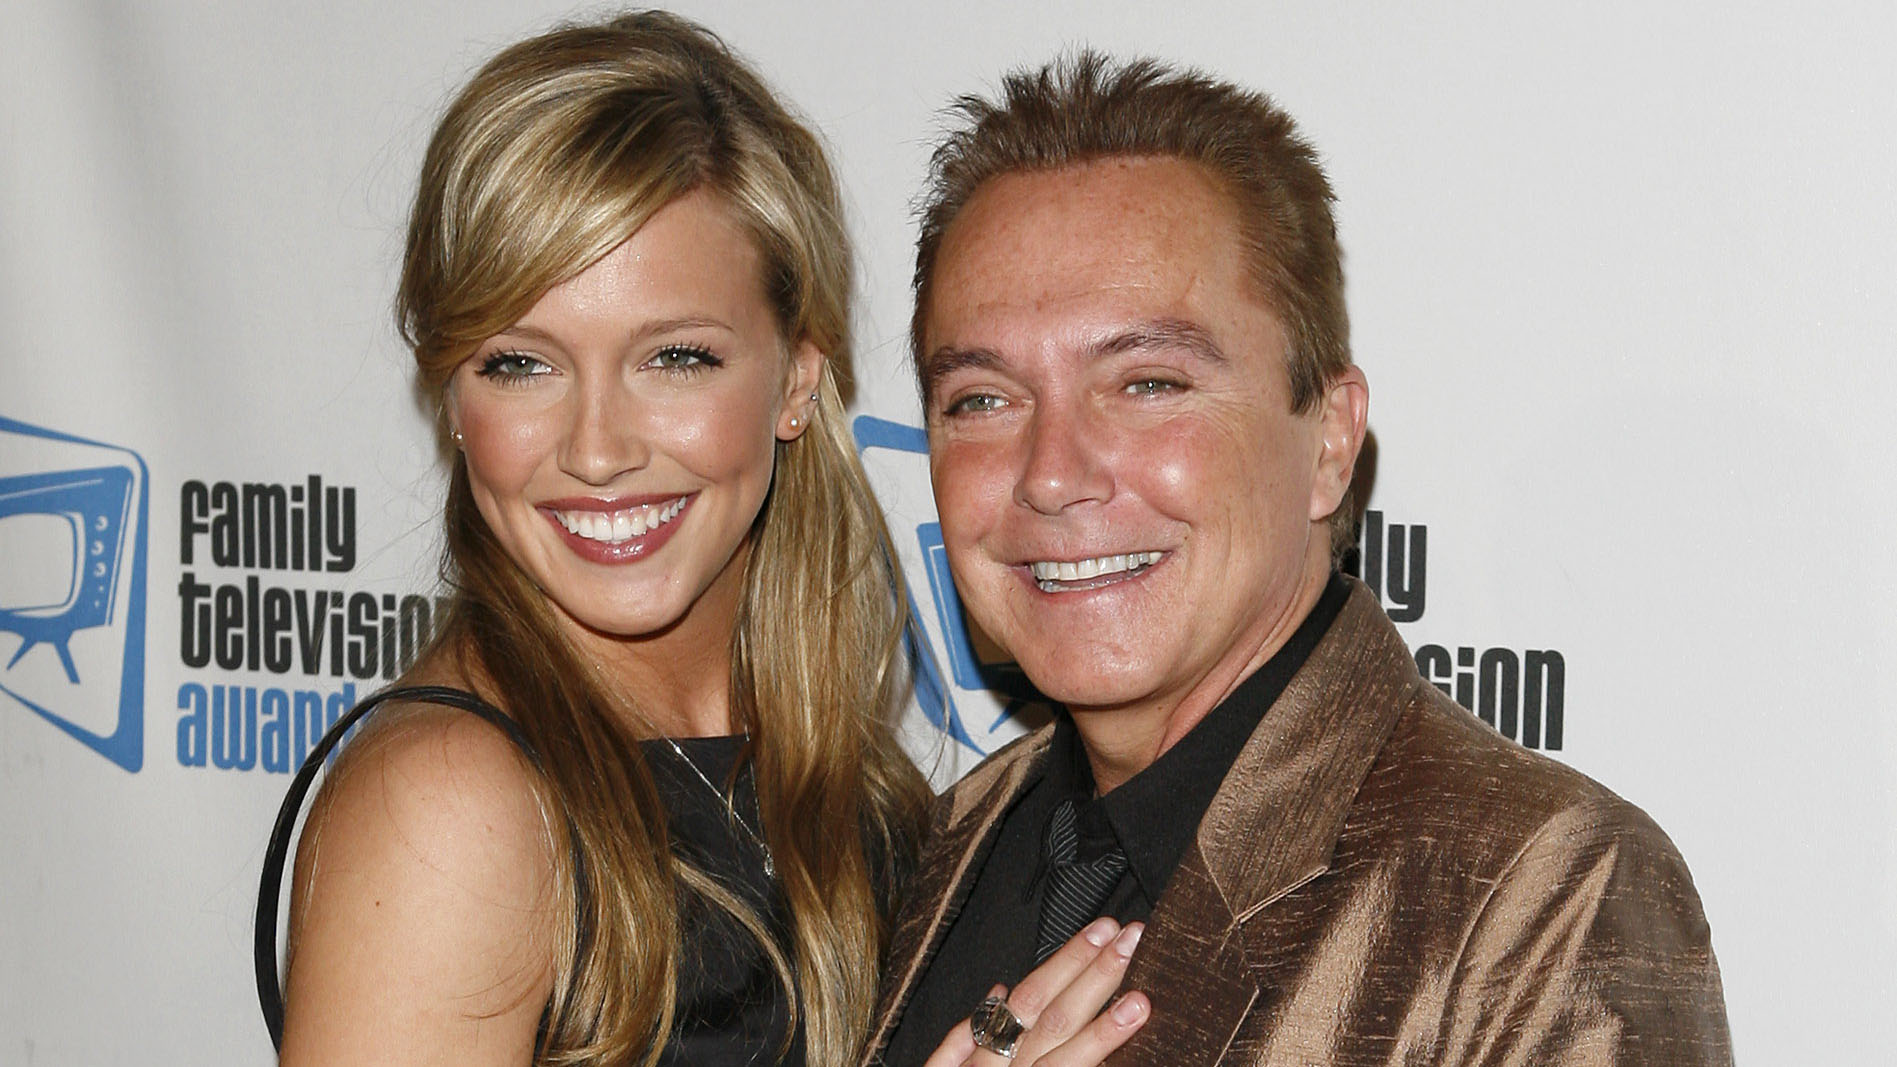 David Cassidy S Daughter Katie Gets Married One Year After His Death